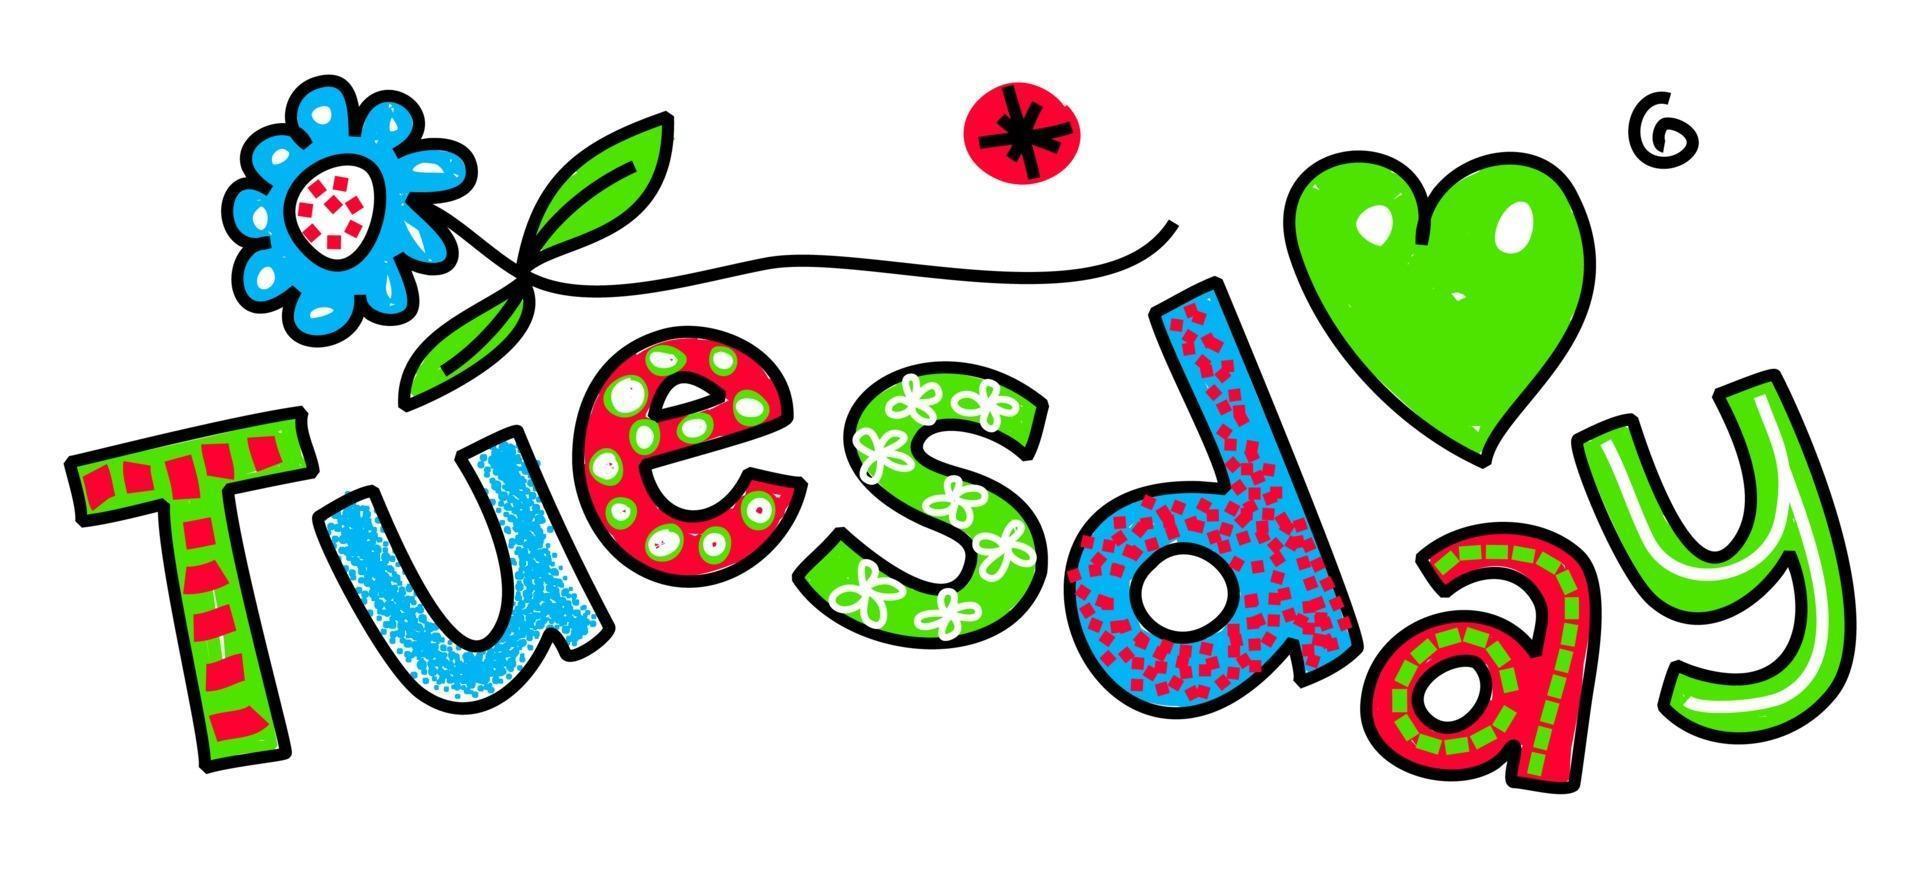 Tuesday Week Day Doodle Text Lettering vector